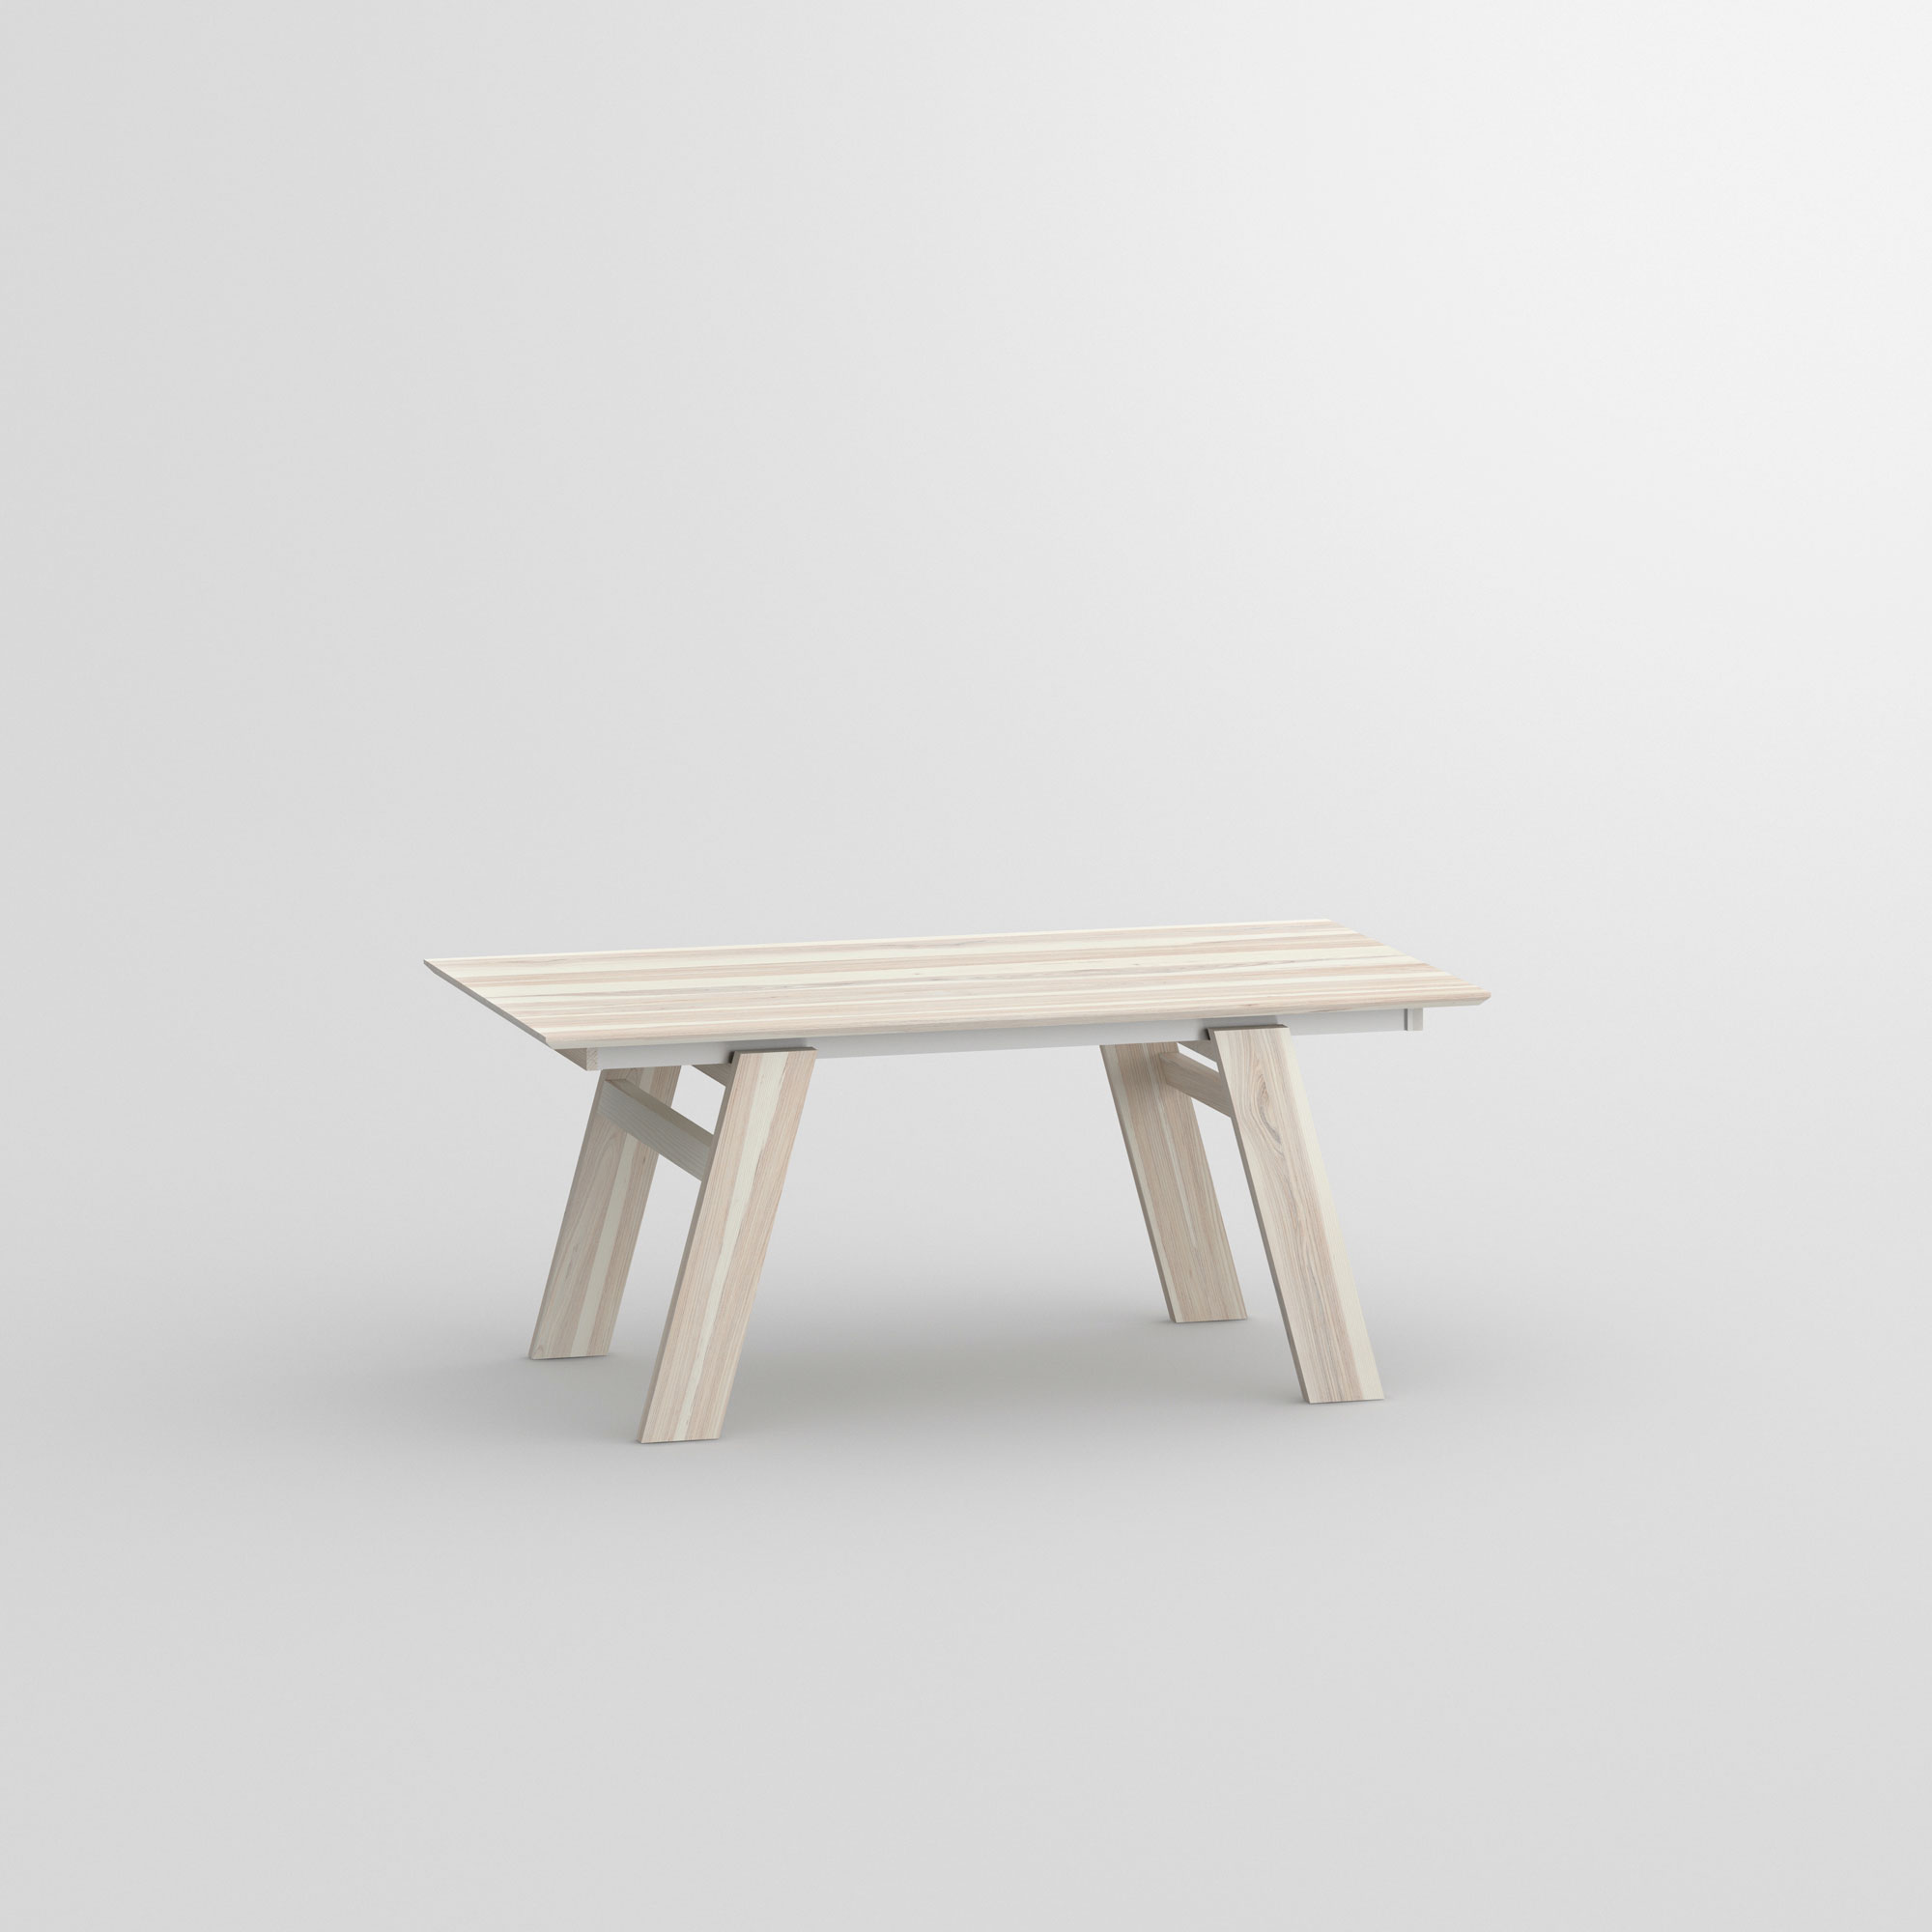 Solid Wood Extendable Table CULTUS BUTTERFLY cam1 custom made in solid wood by vitamin design